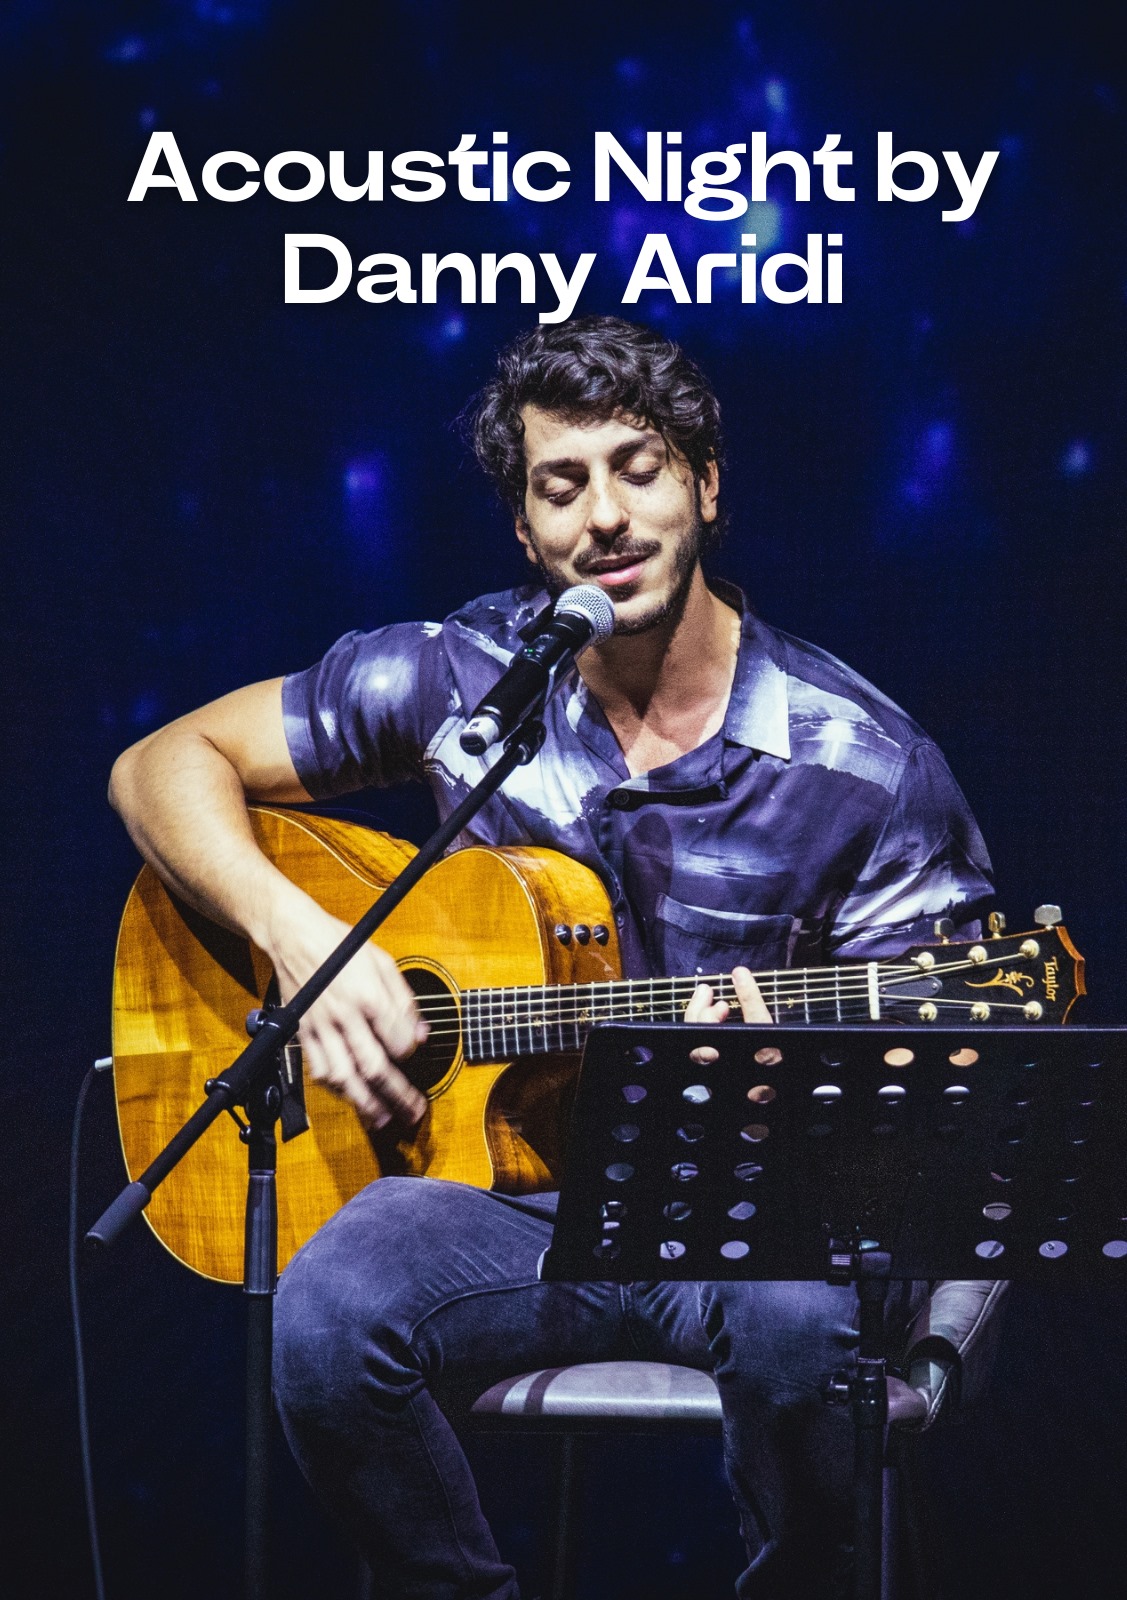 Acoustic Night by Danny Aridi